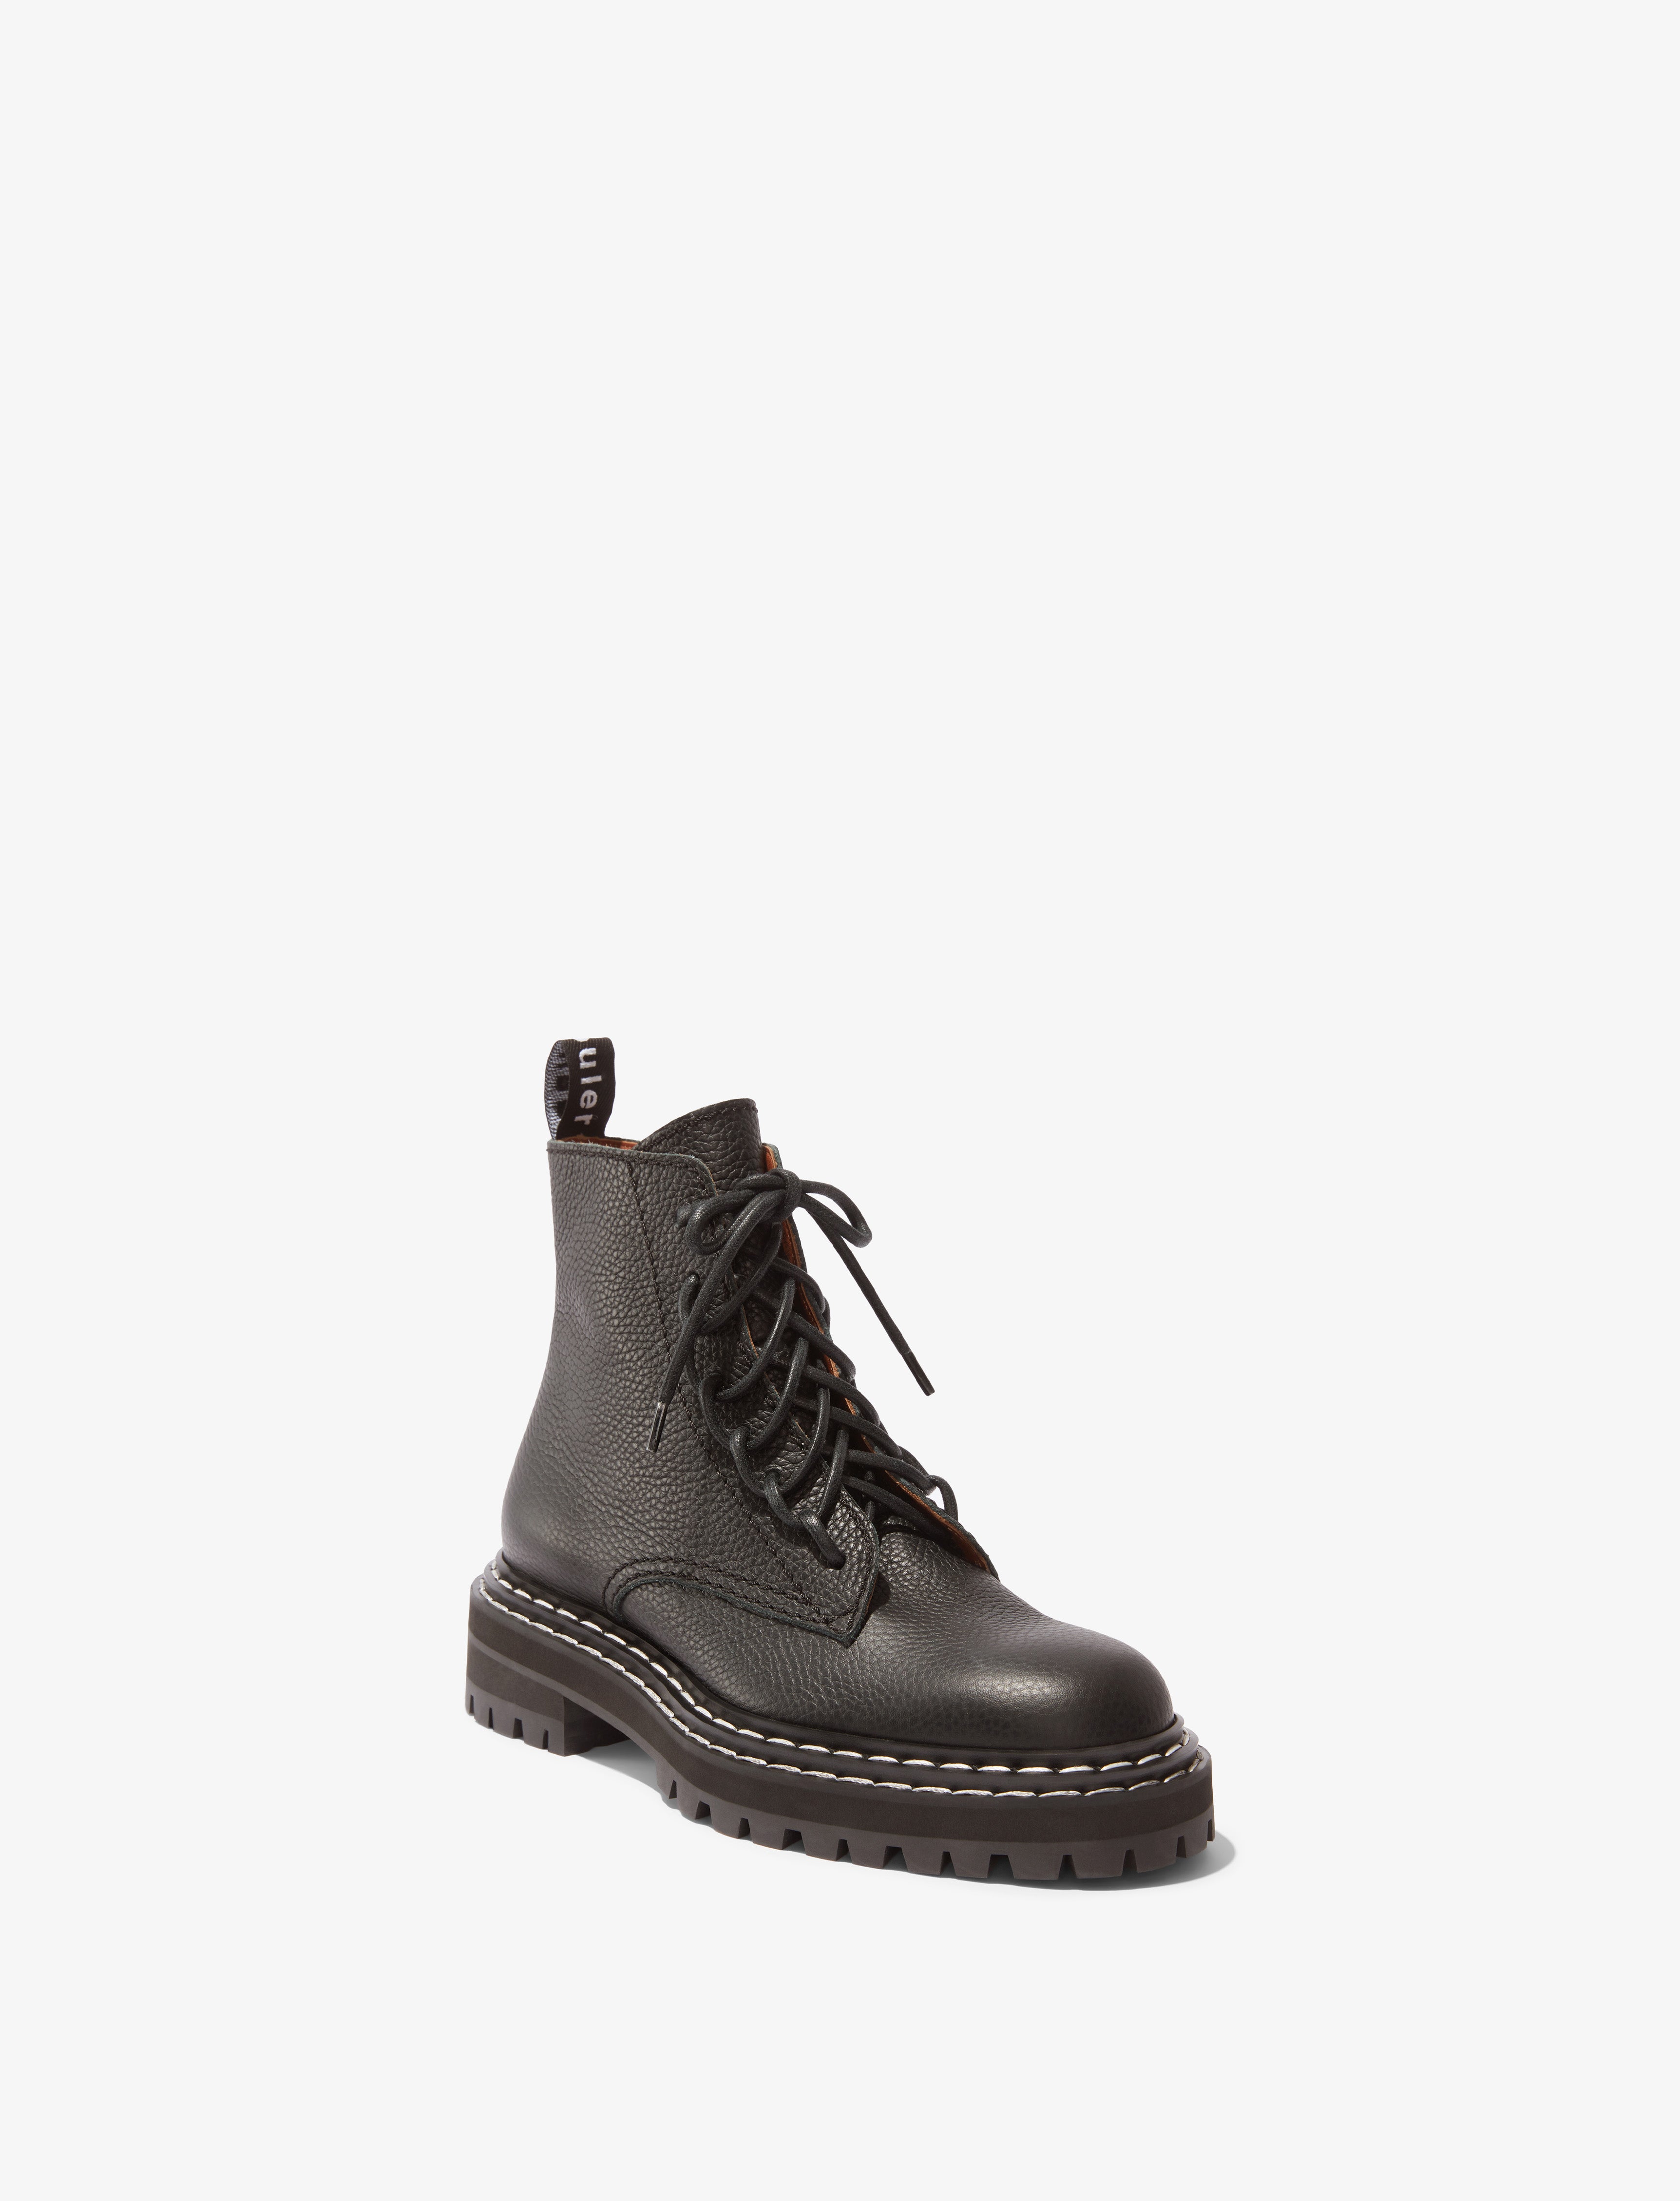 Lug Sole Combat Boots in Grainy Leather – Proenza Schouler